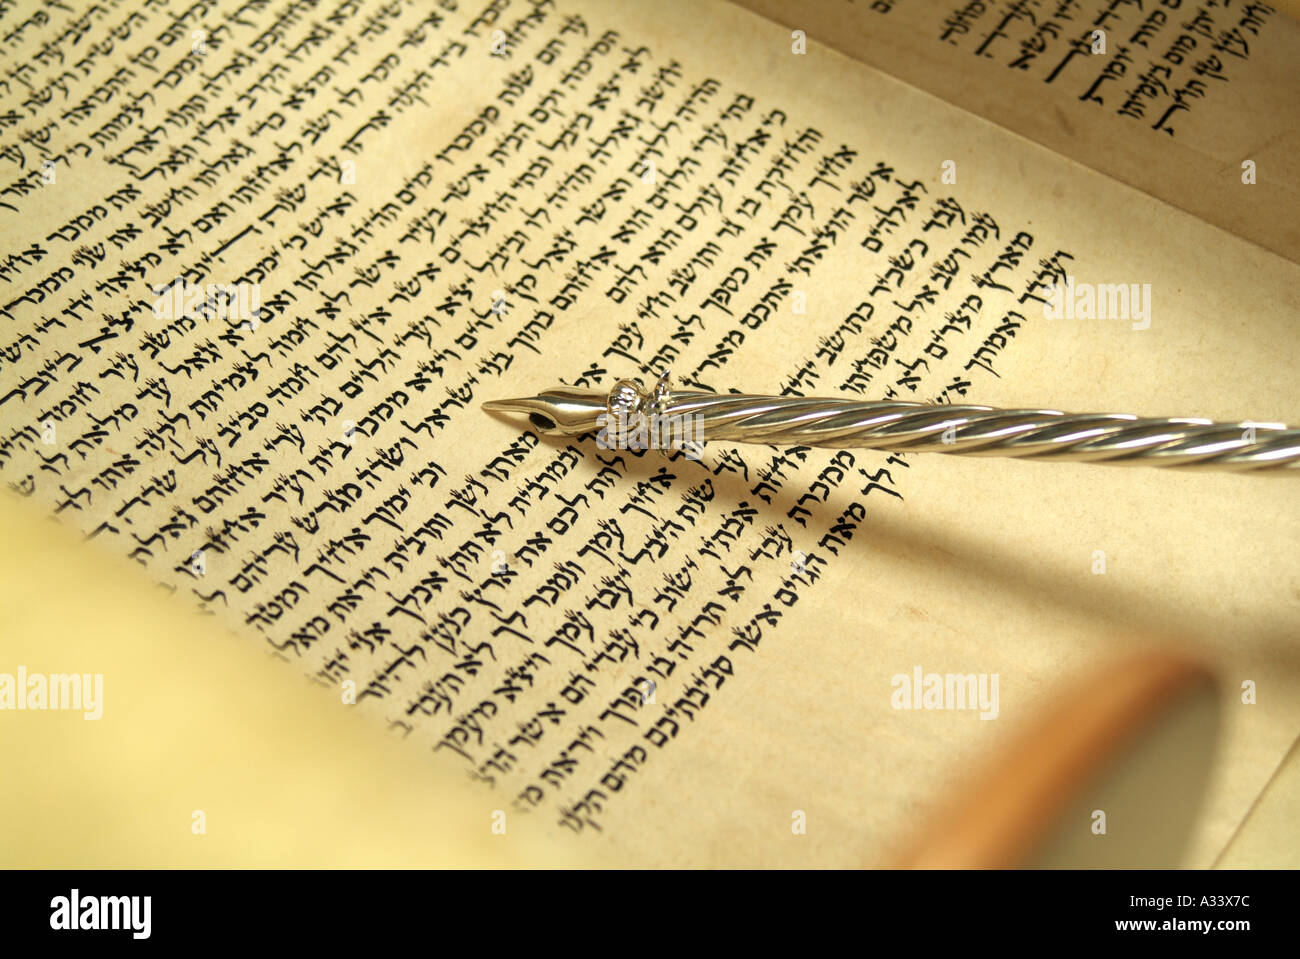 Hebrew Torah scroll with silver yad pointing to Hebrew script Stock Photo